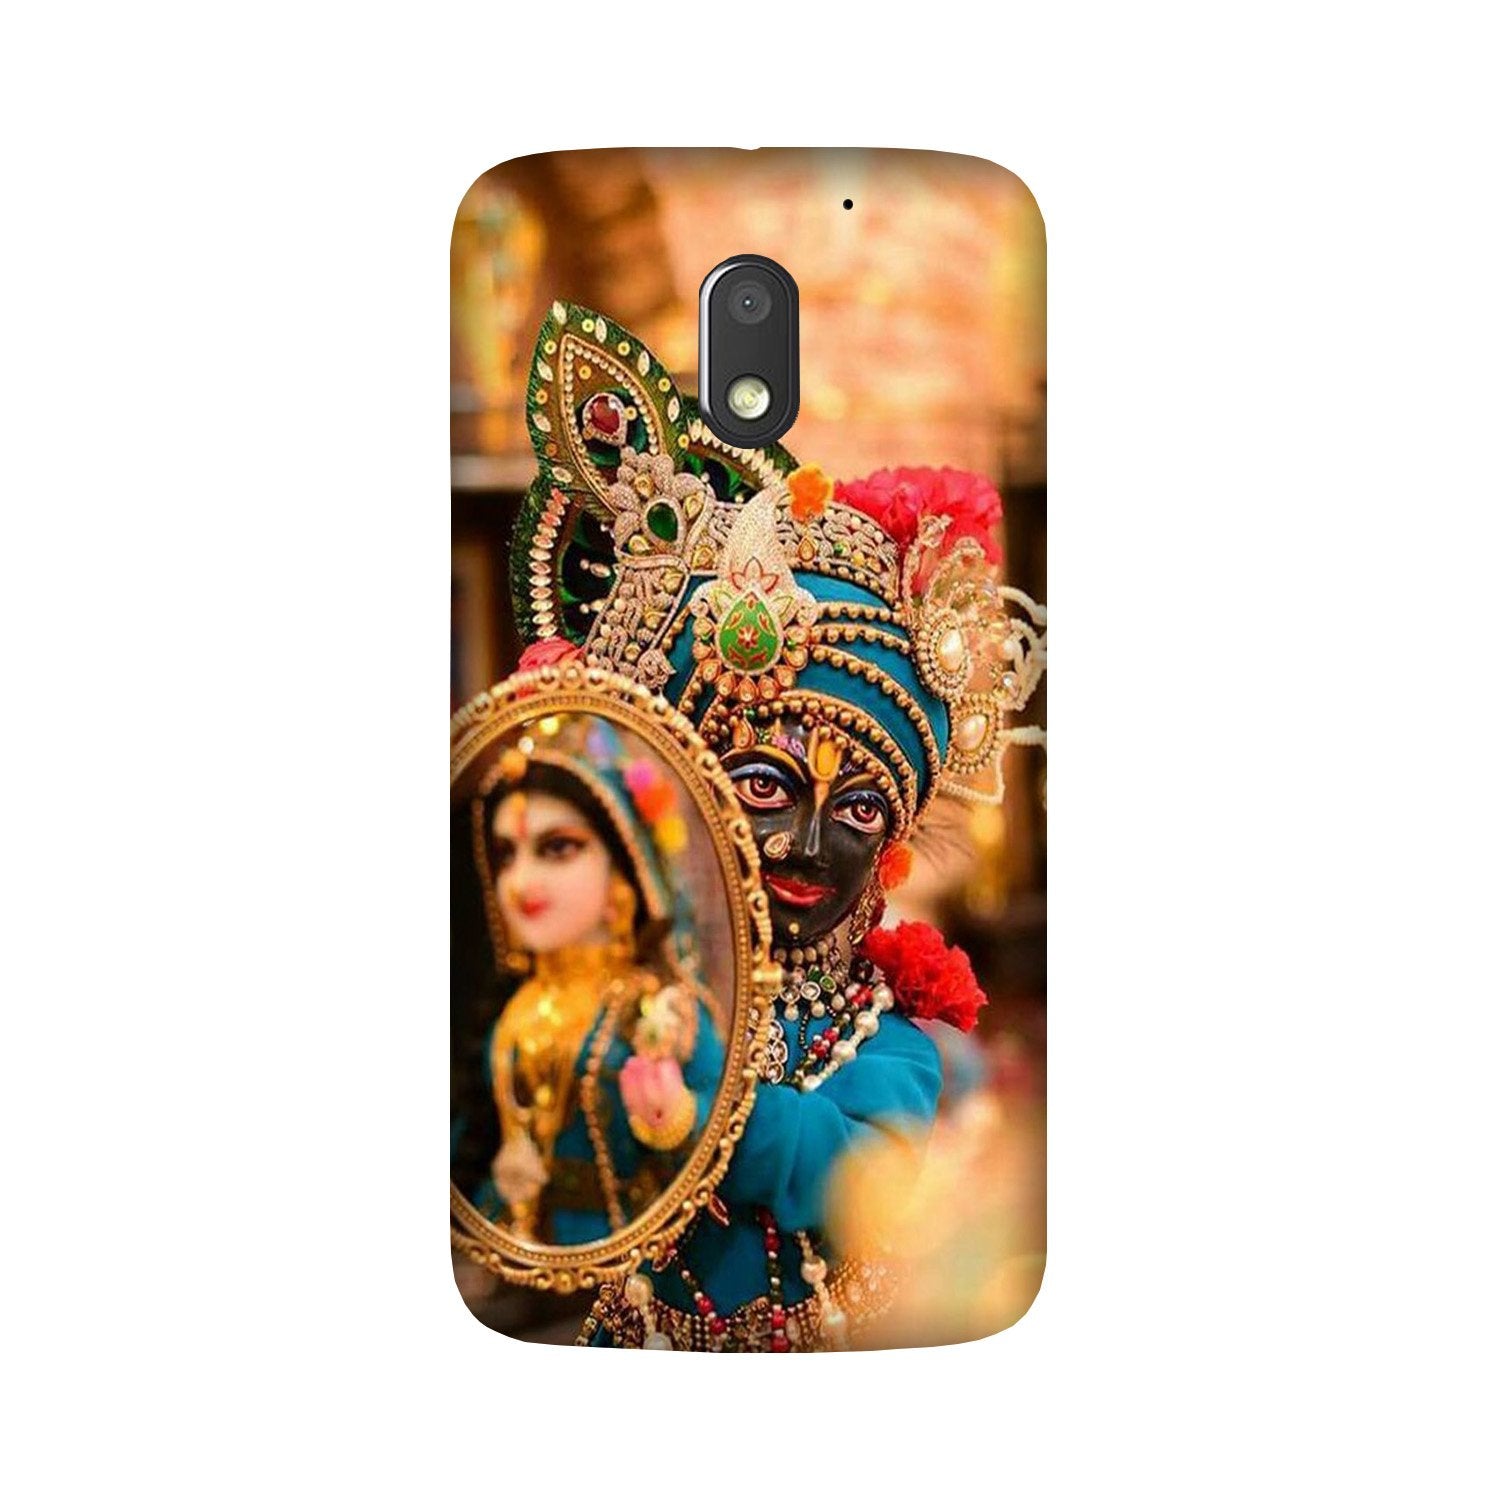 Lord Krishna5 Case for Moto G4 Play